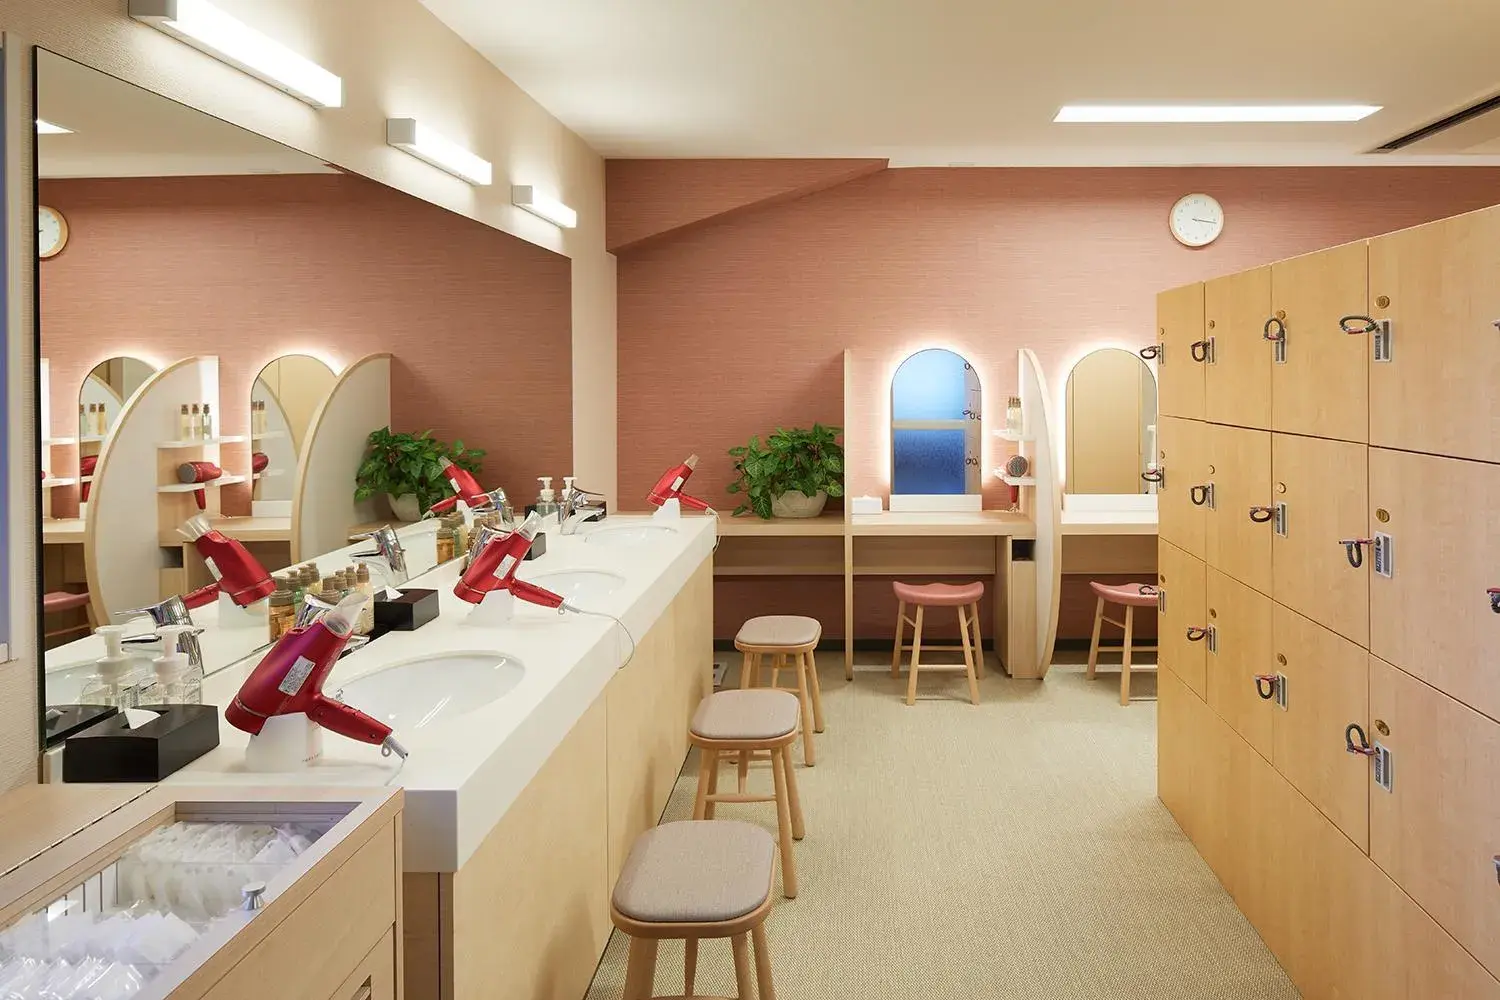 Area and facilities in Almont Hotel Kyoto